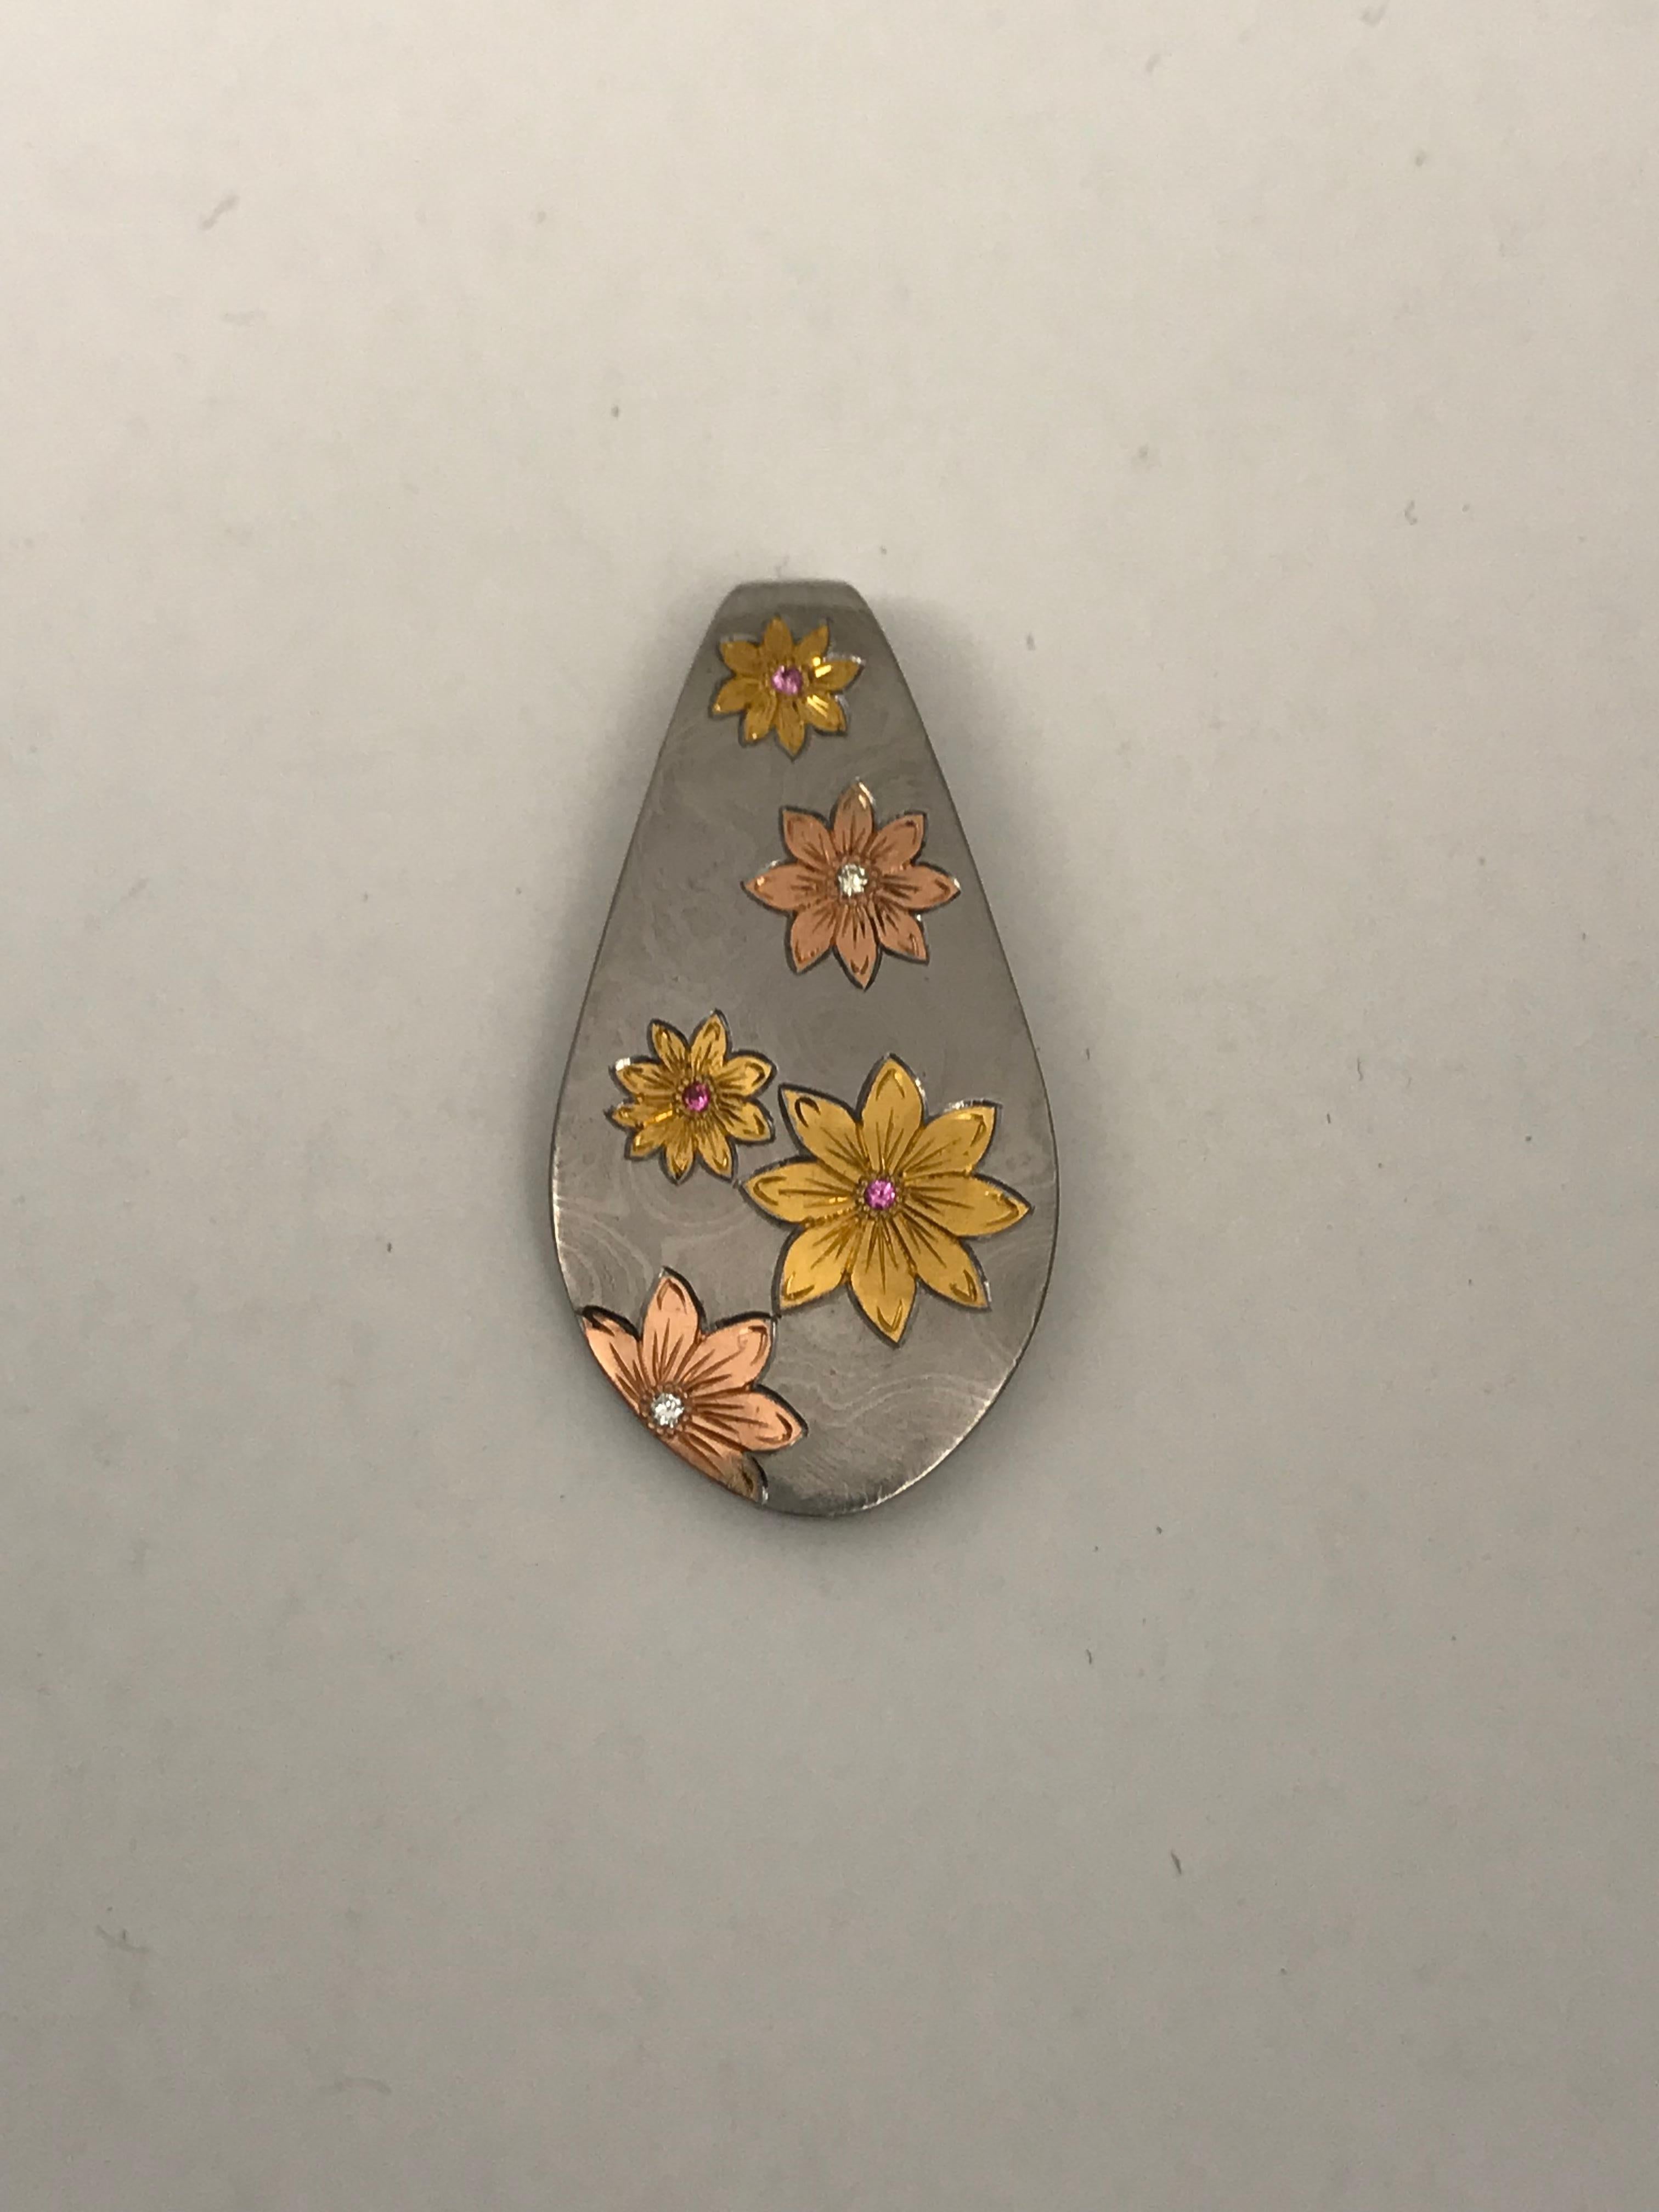 Damascus Steel Pendant with Rose Gold and 24 Karat Gold Flowers For Sale 1